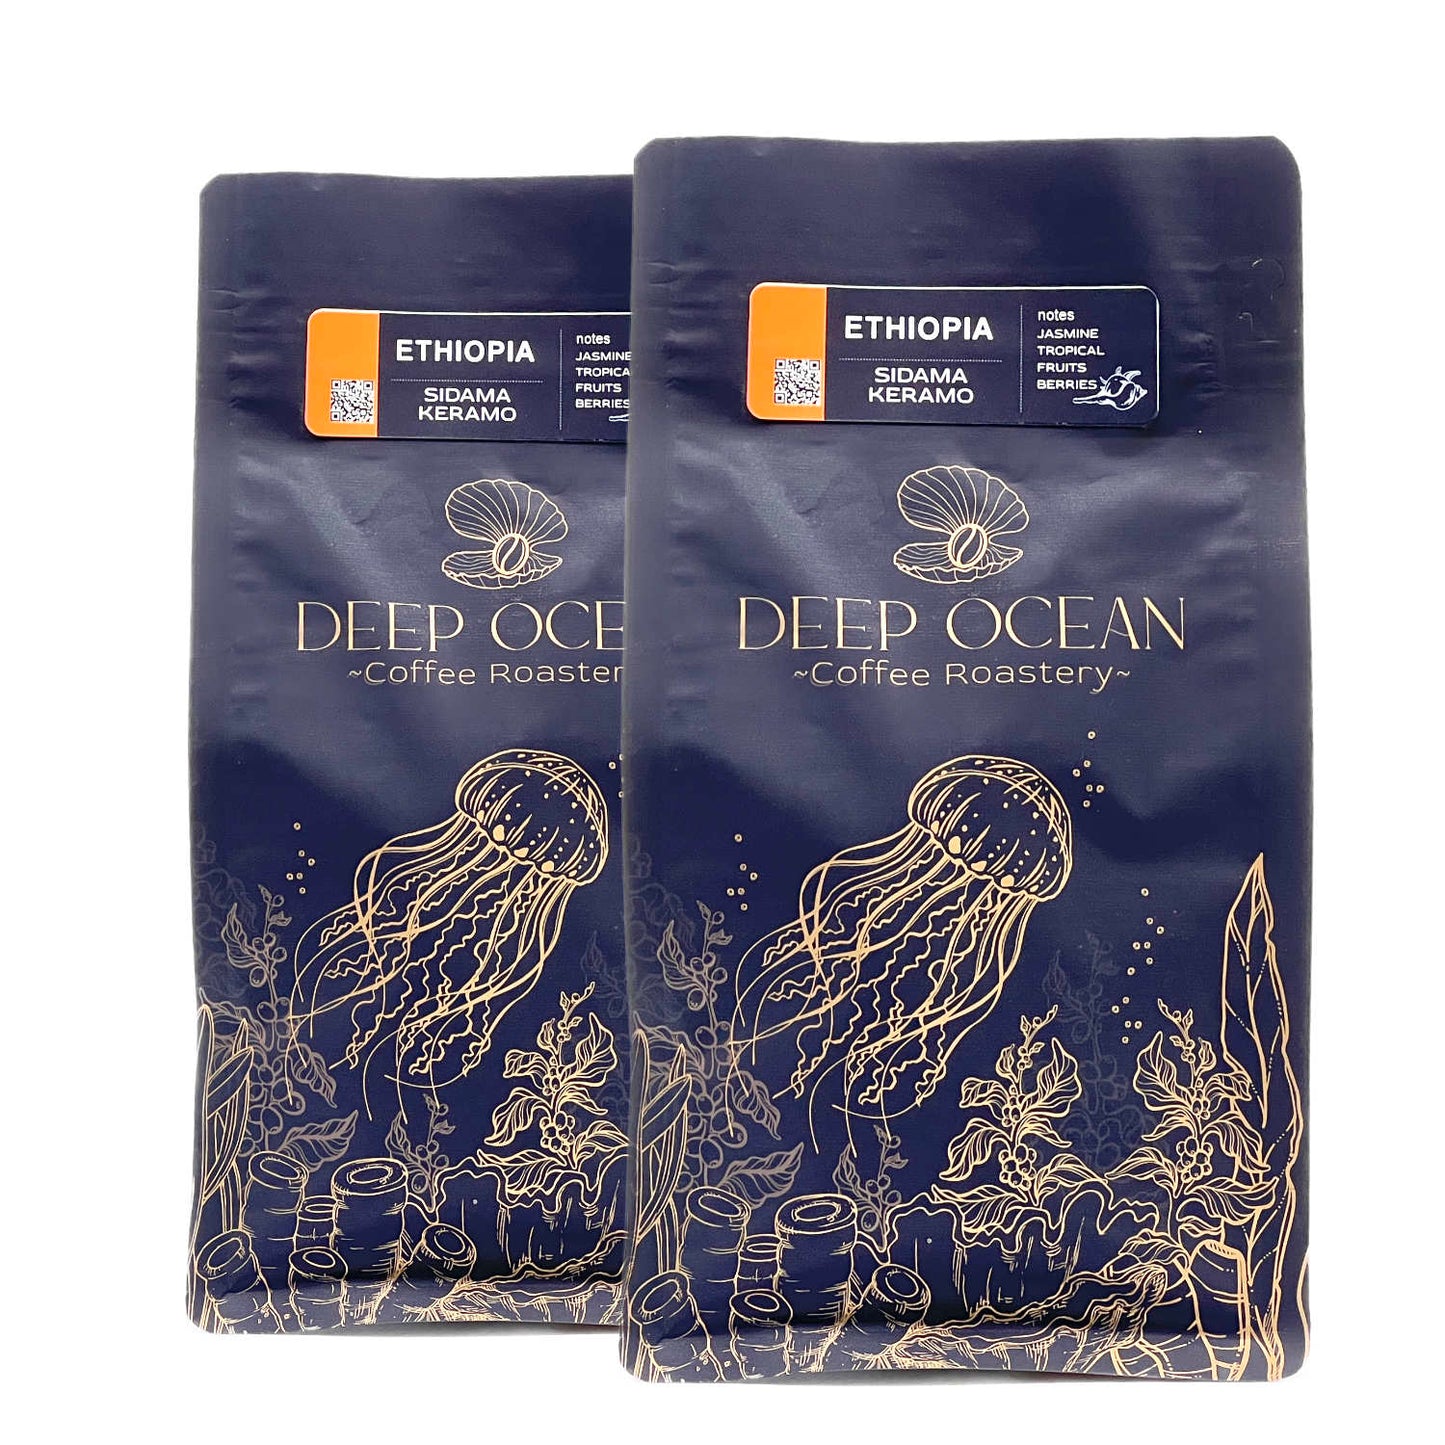 variant 2 - - light roasted coffee Ethiopia is great choice of specialty coffee.